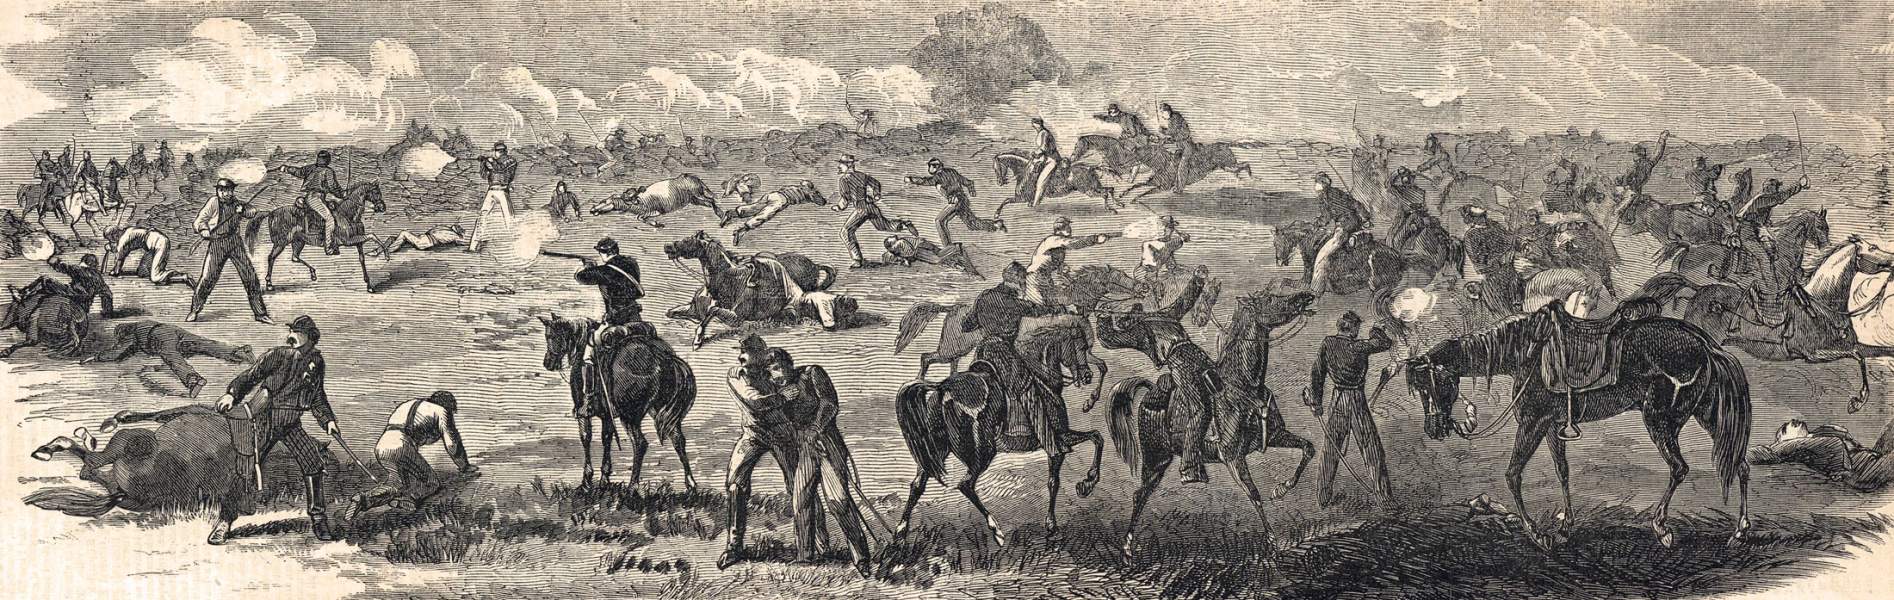 Cavalry skirmish, Upperville, Virginia, June 21, 1863, artist's impression, zoomable image